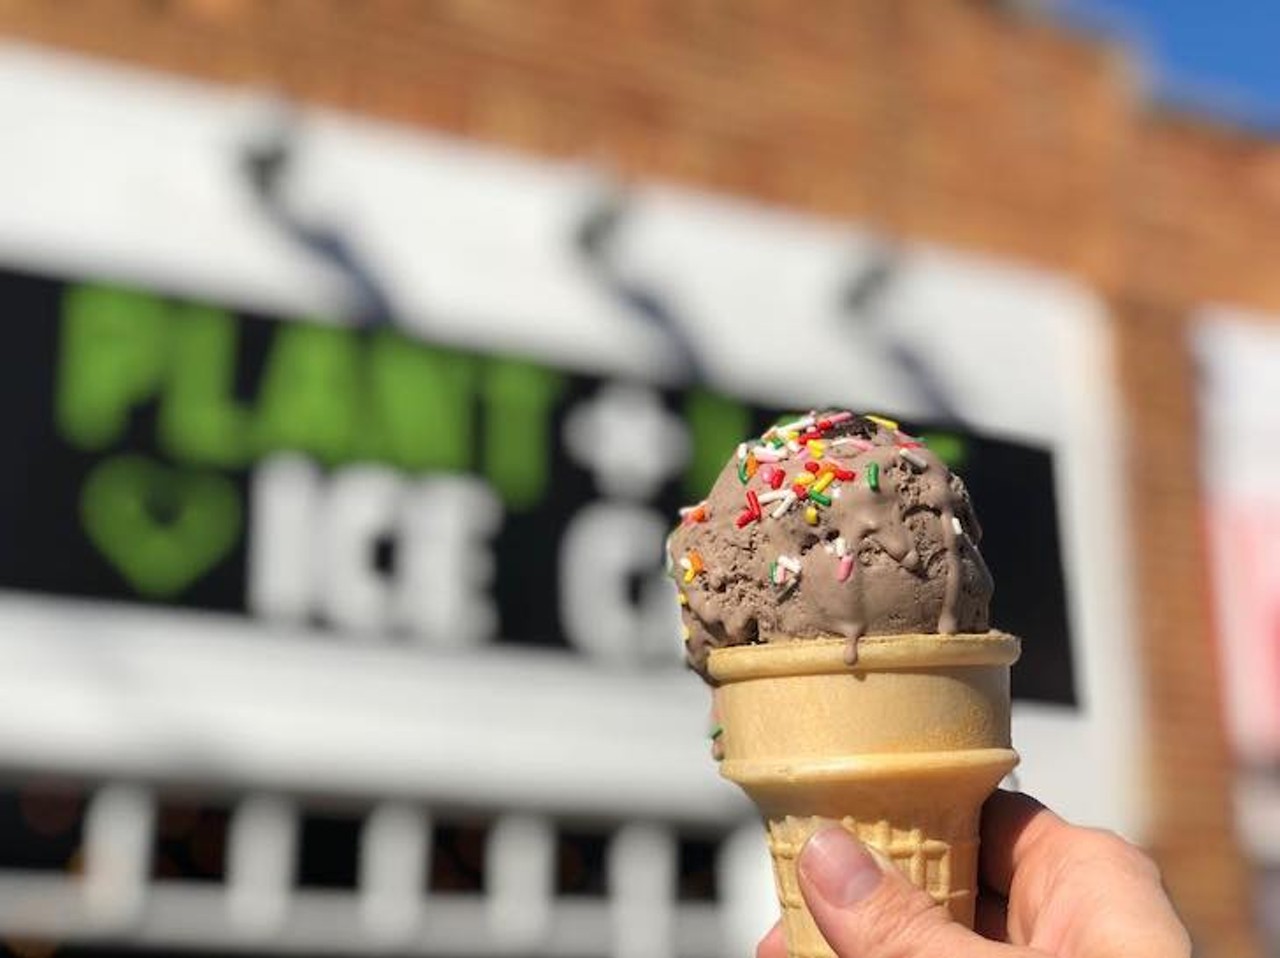 Plant + Love Ice Cream  
953 Central Ave, St Petersburg, 727- 900-6744
St. Petersburg's EDGE District just keeps on growing. The newest addition to the popular hub for both bites and beverages is an artist collective with vegan ice cream.
Photo via Plant + Love Ice Cream/Facebook